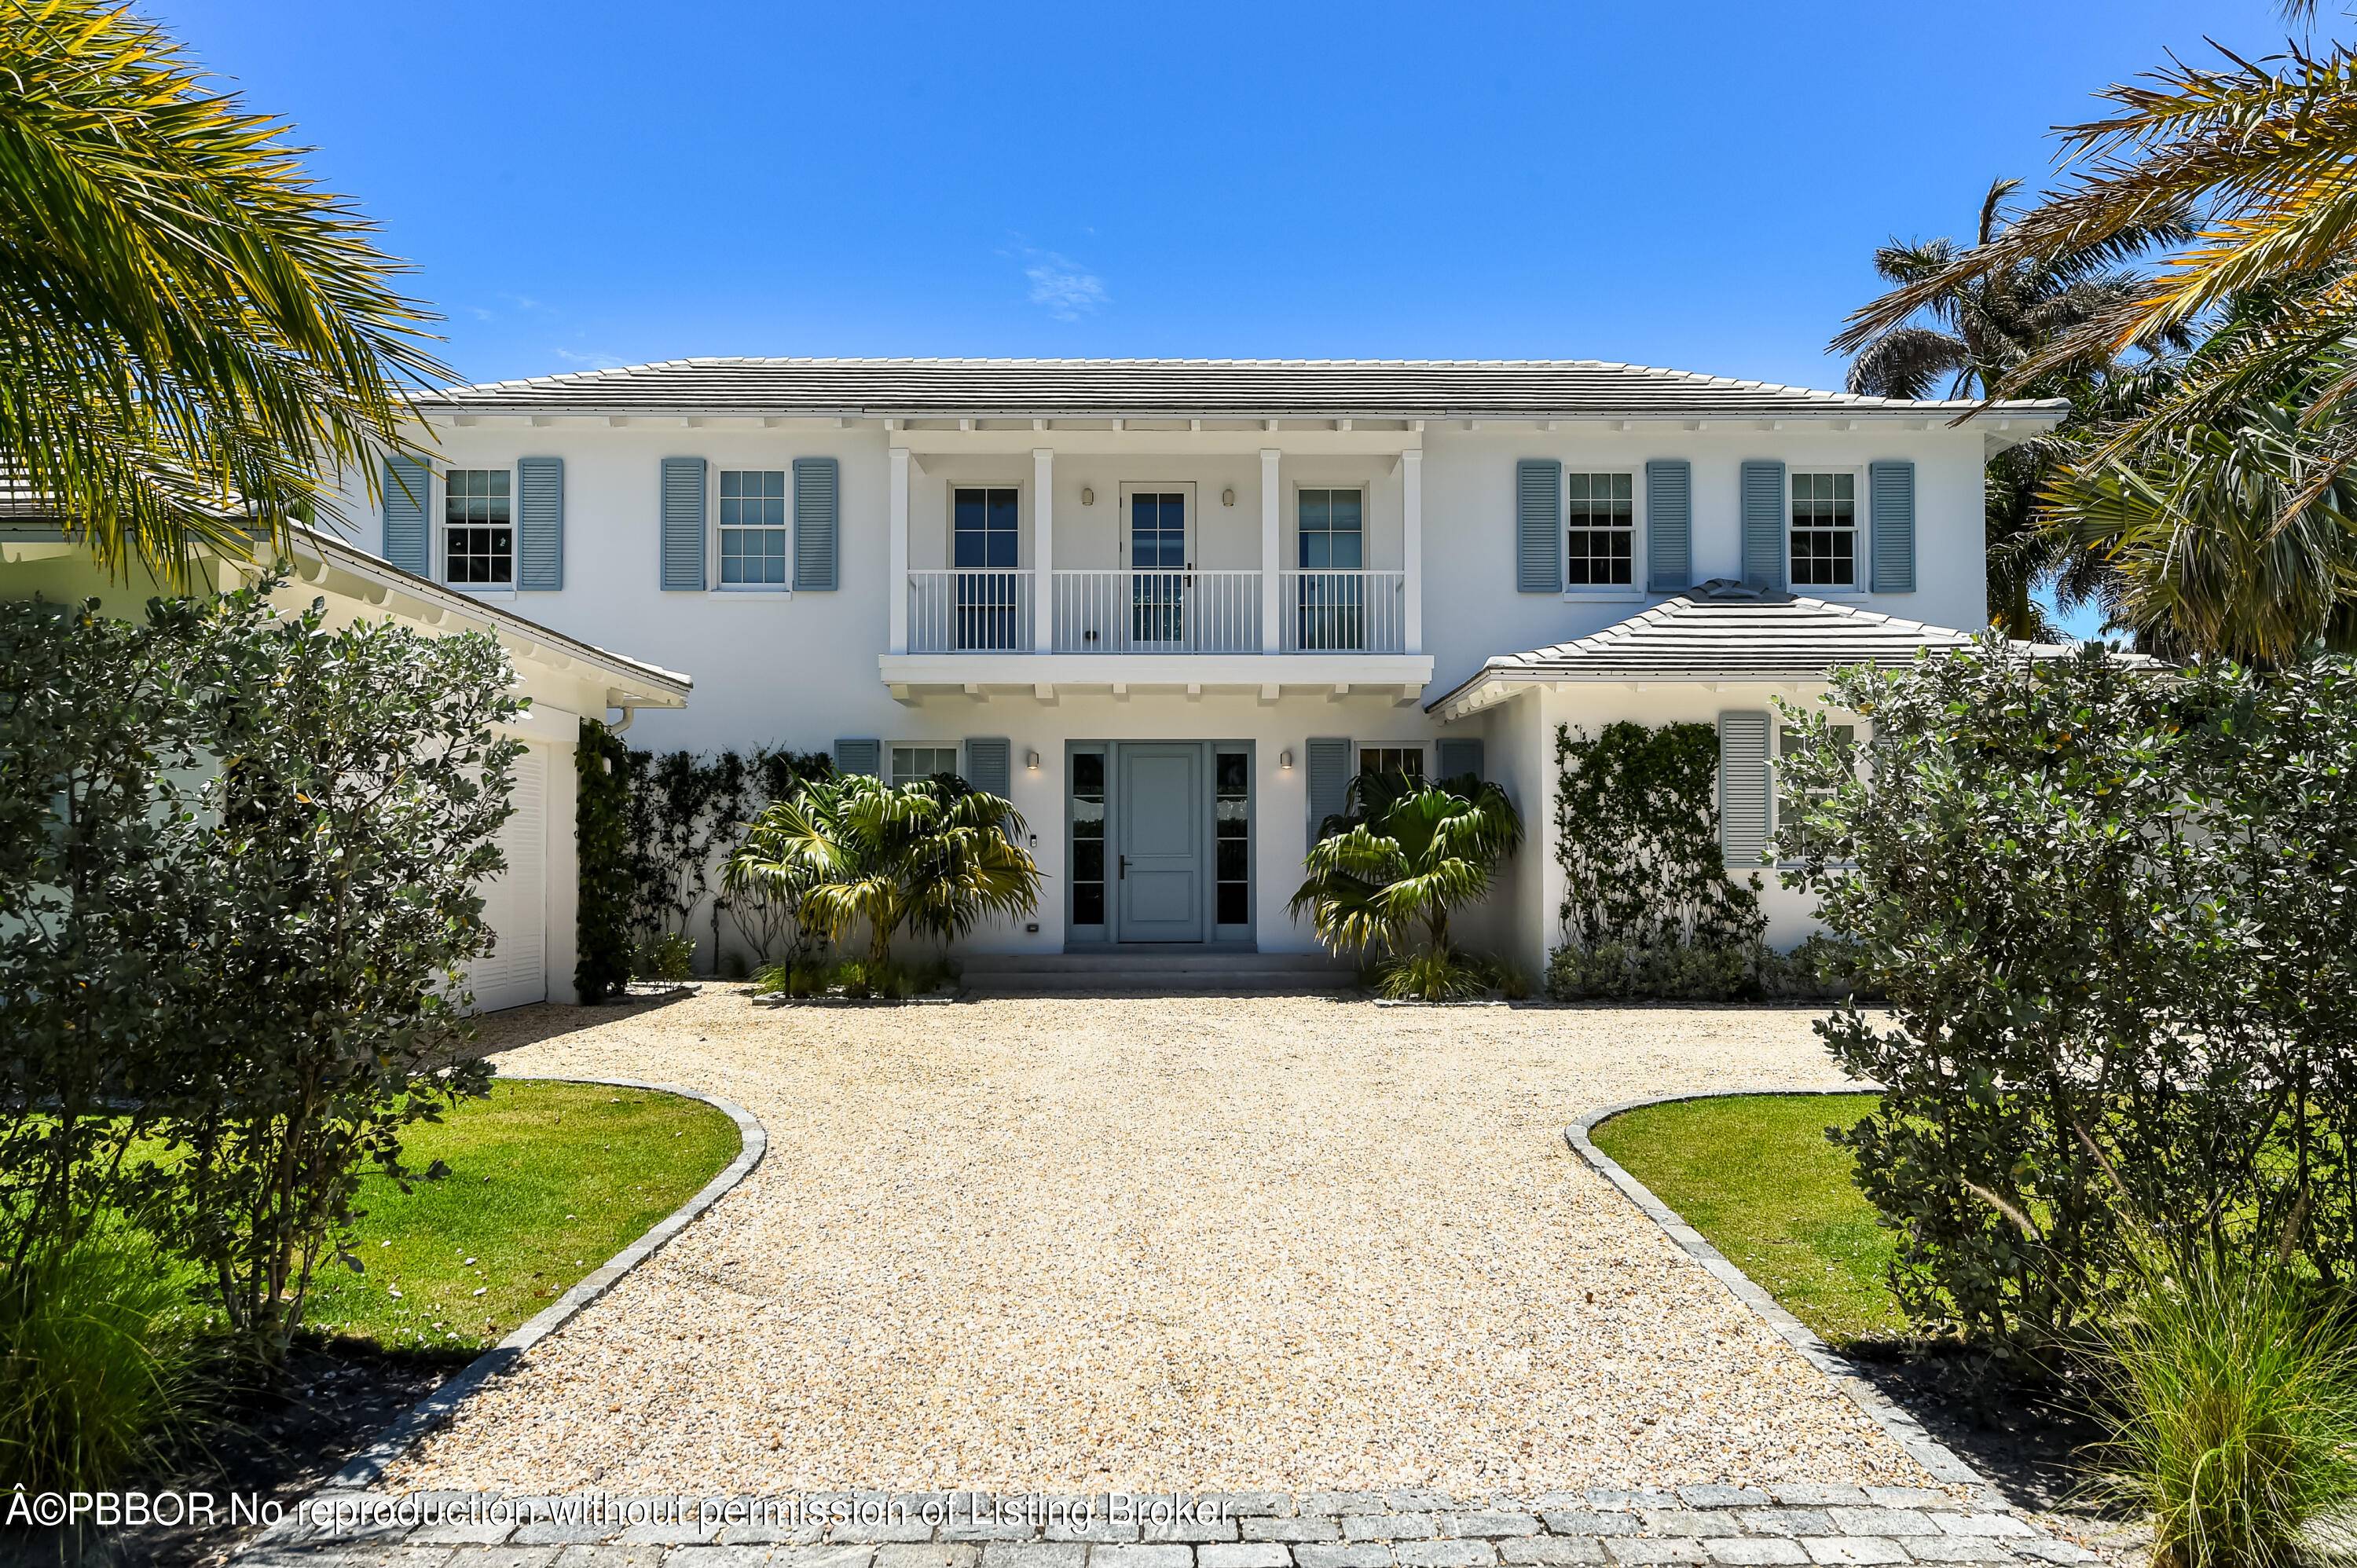 Inviting and glamorous, this sophisticated custom Shapiro Pertnoy home finished in 2020, represents Palm Beach with a California aesthetic.